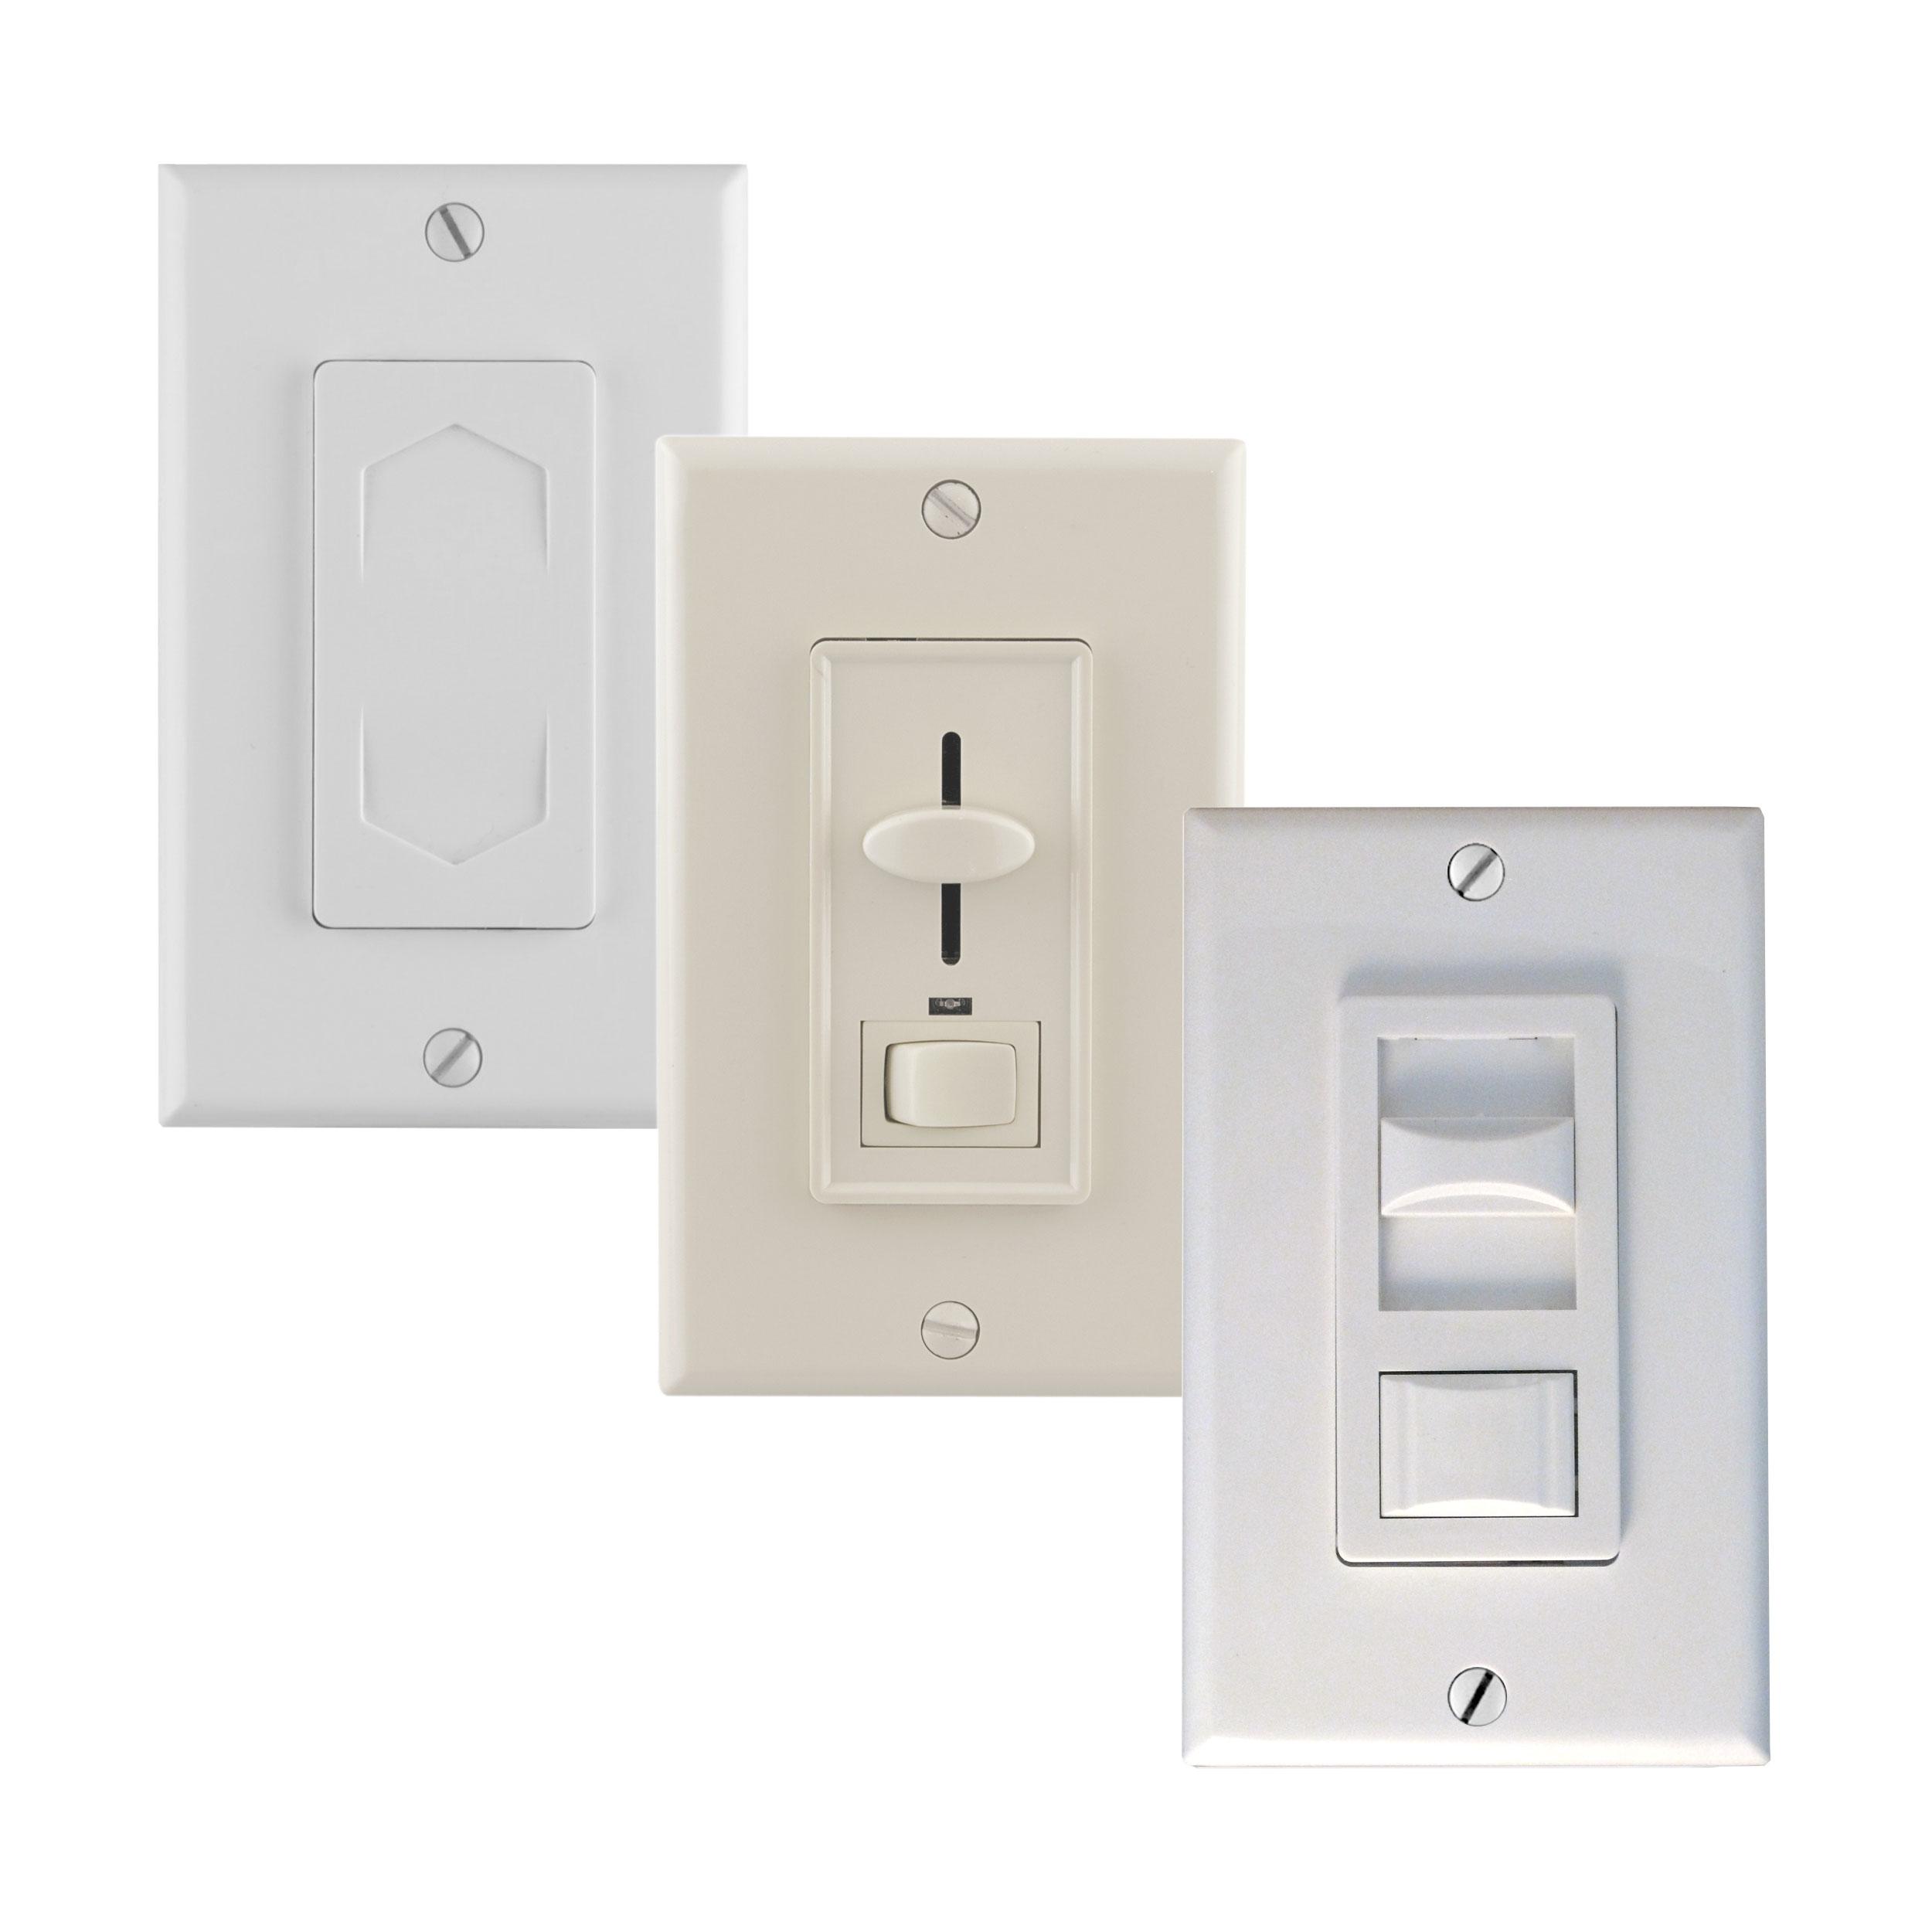 Dimmable LEDs - Electronic Low Voltage Dimmers - REIGN LED Dimmer Switches